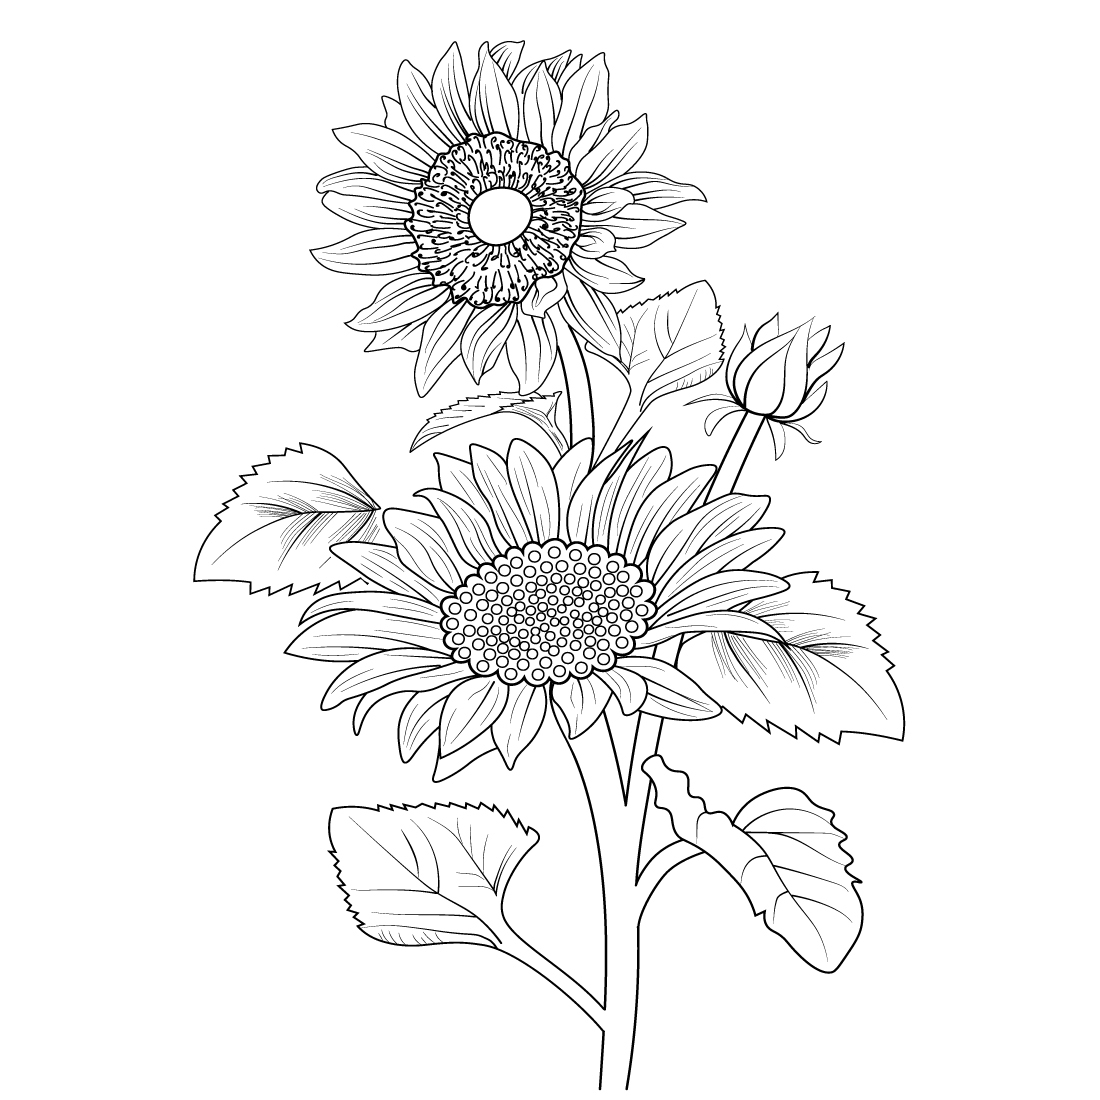 Pencil Sketch Colored Of A Sunflower Backgrounds | JPG Free Download -  Pikbest